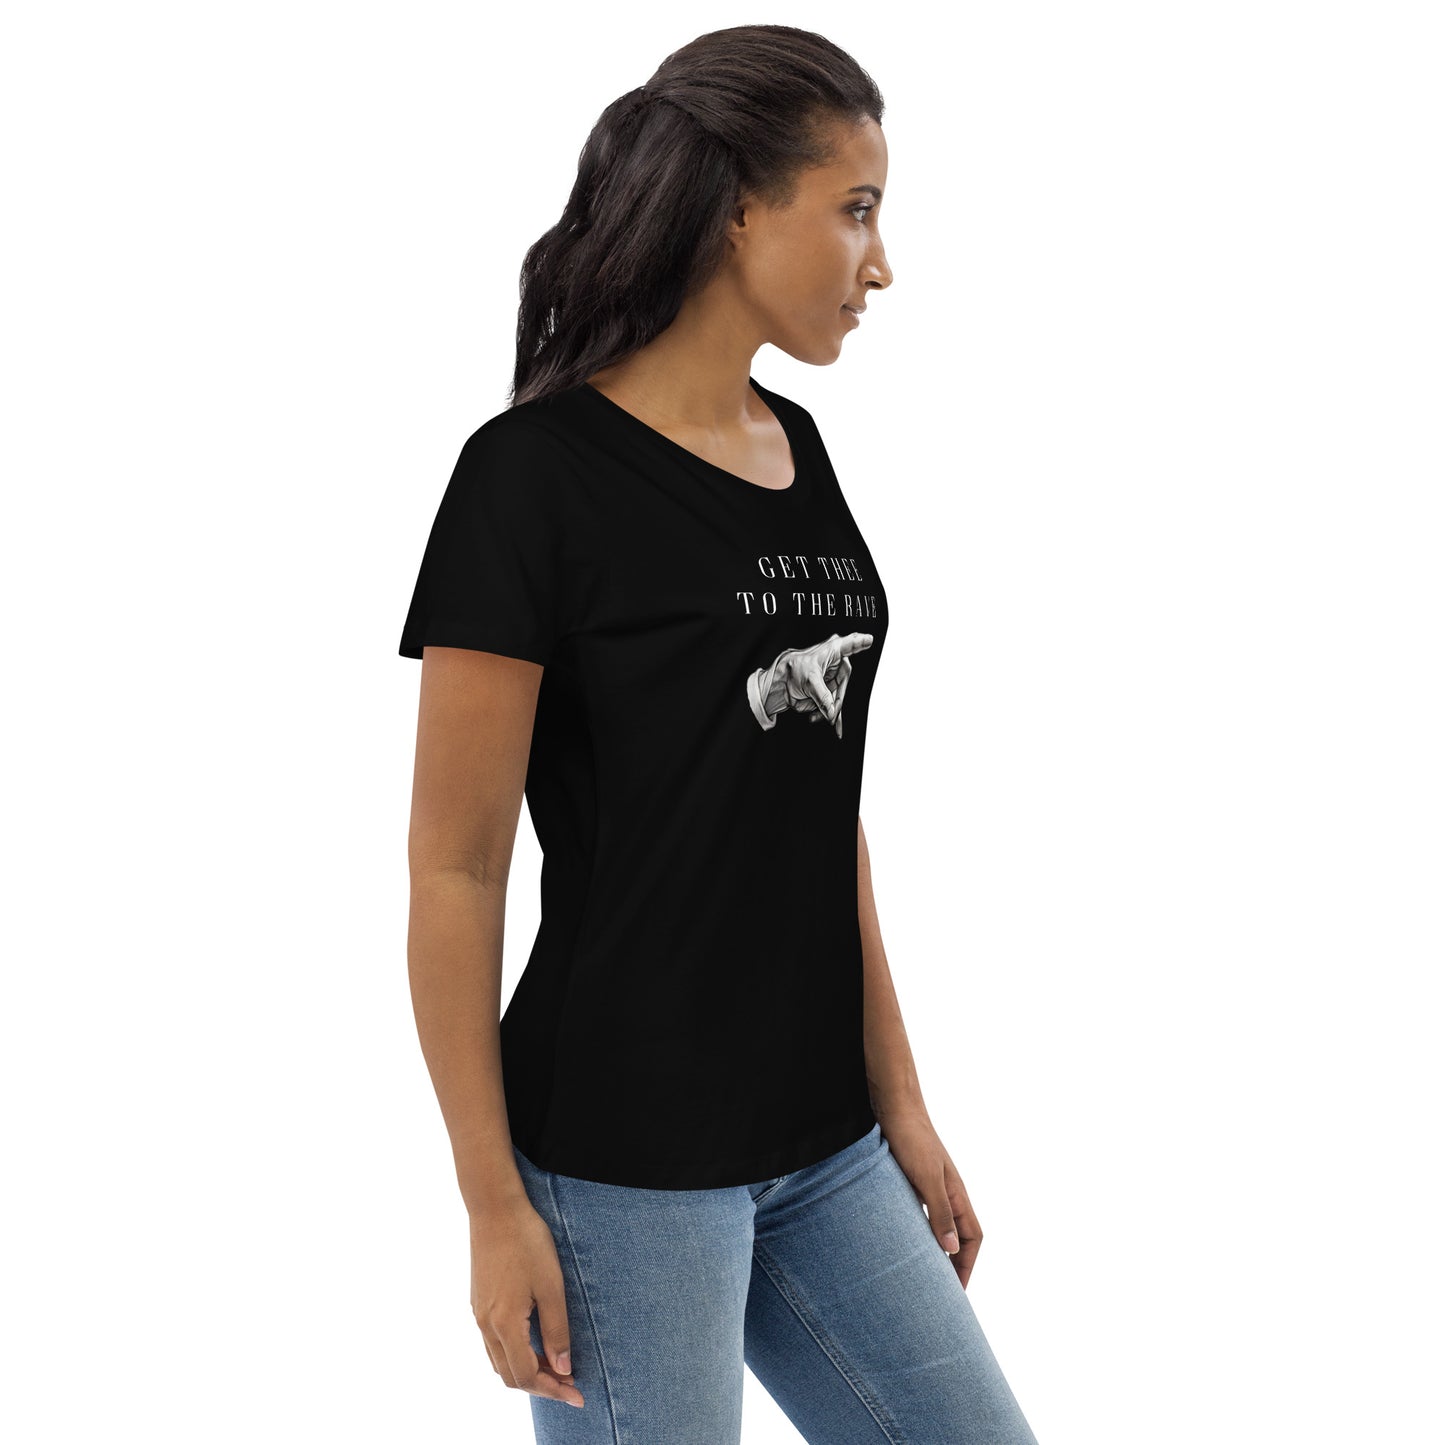 To The Rave - Women's Fitted T-Shirt